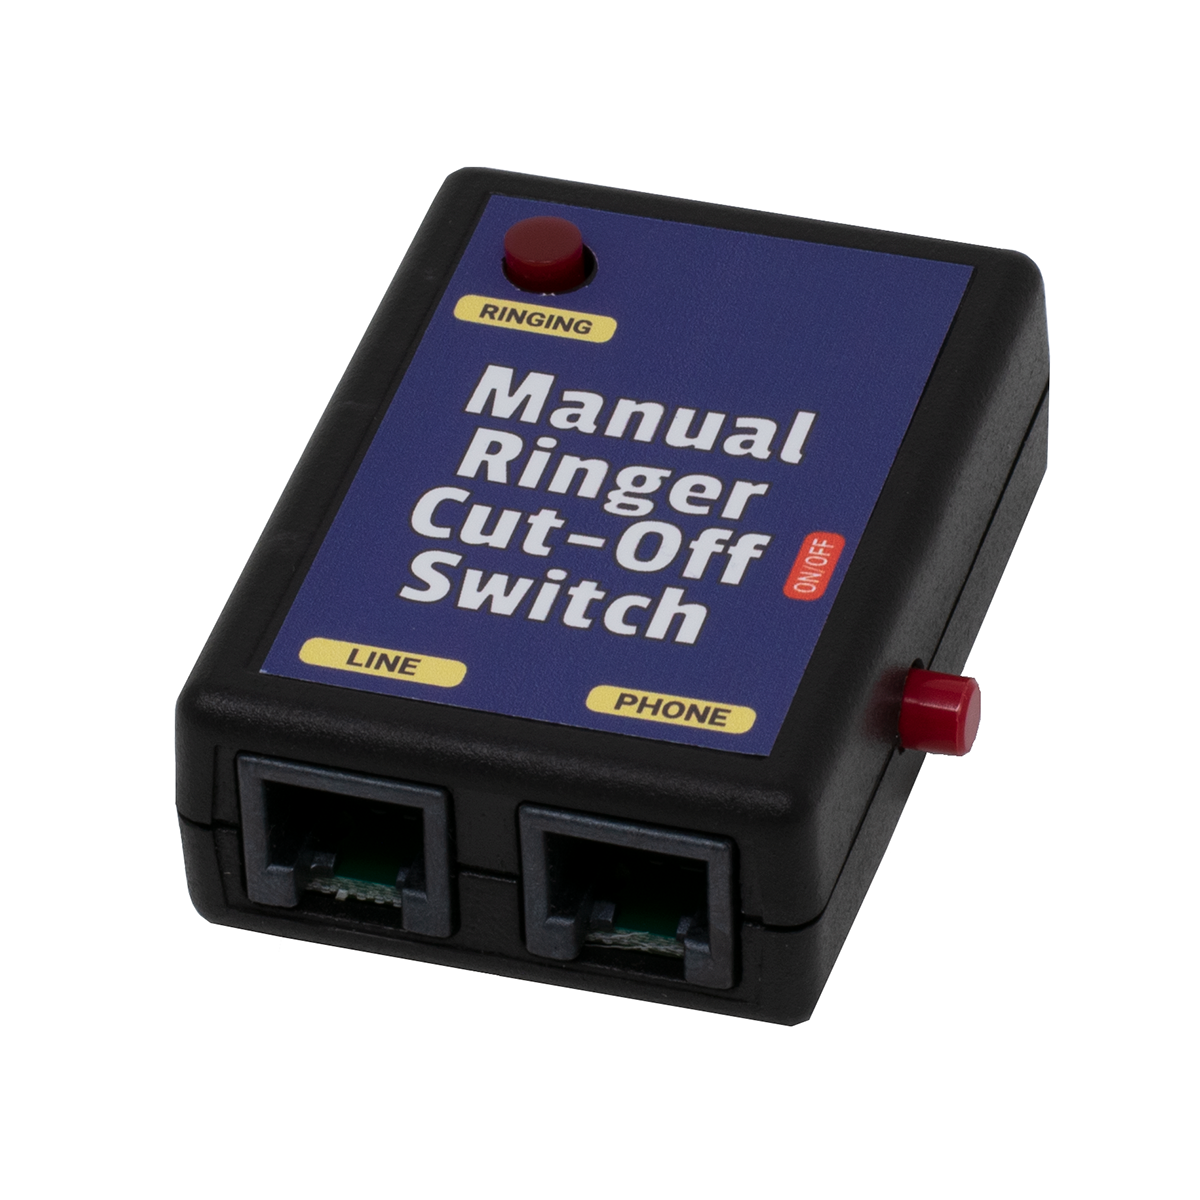 Manual Ringer Cut-Off Switch (Side View)